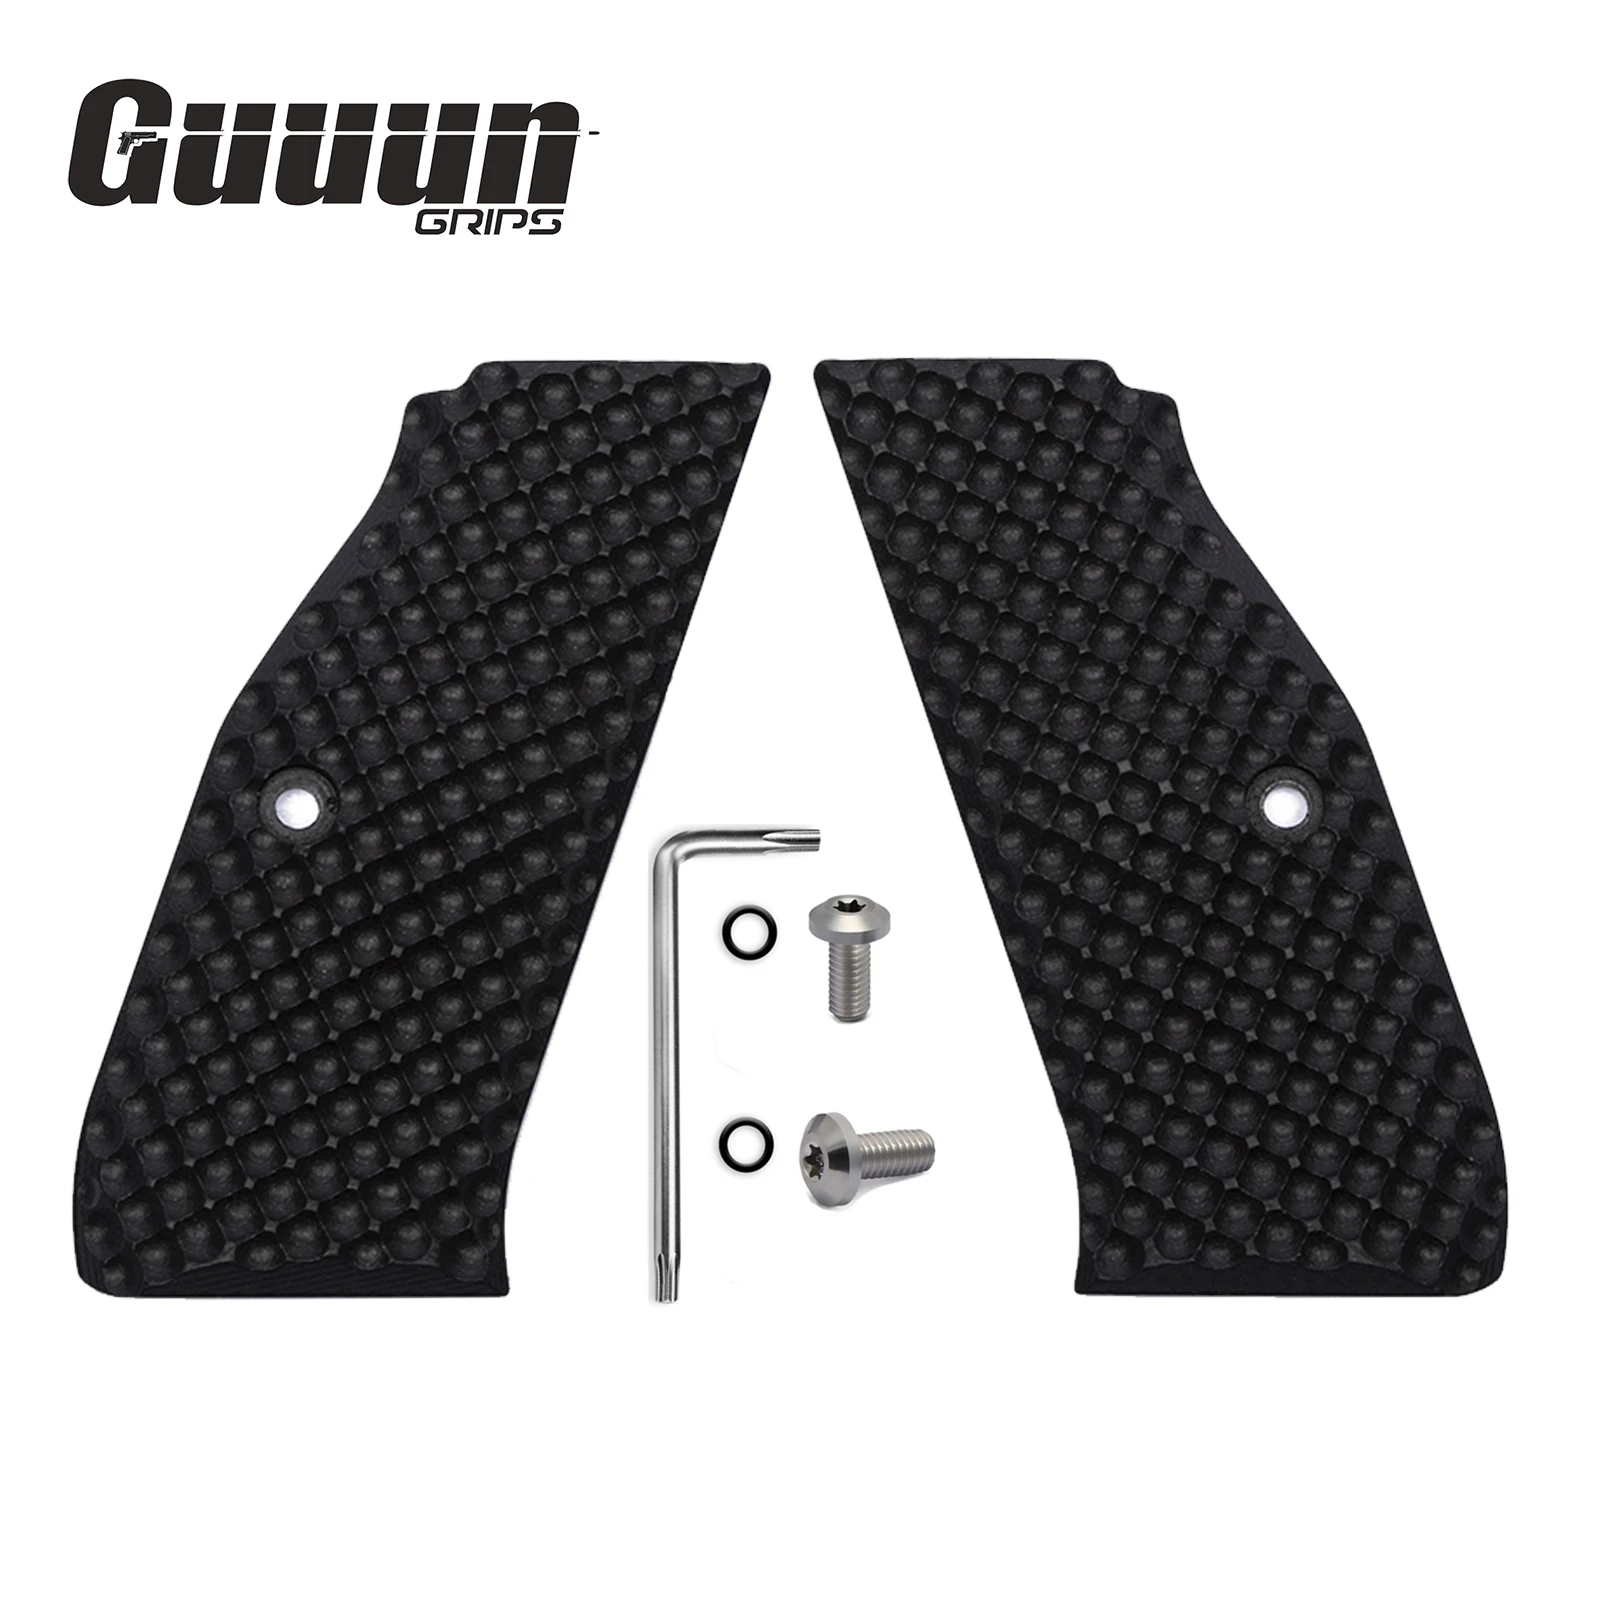 Guuun G10 Grips for CZ Shadow 2 / CZ-75 Palm Swell Tactical Dimple Texture